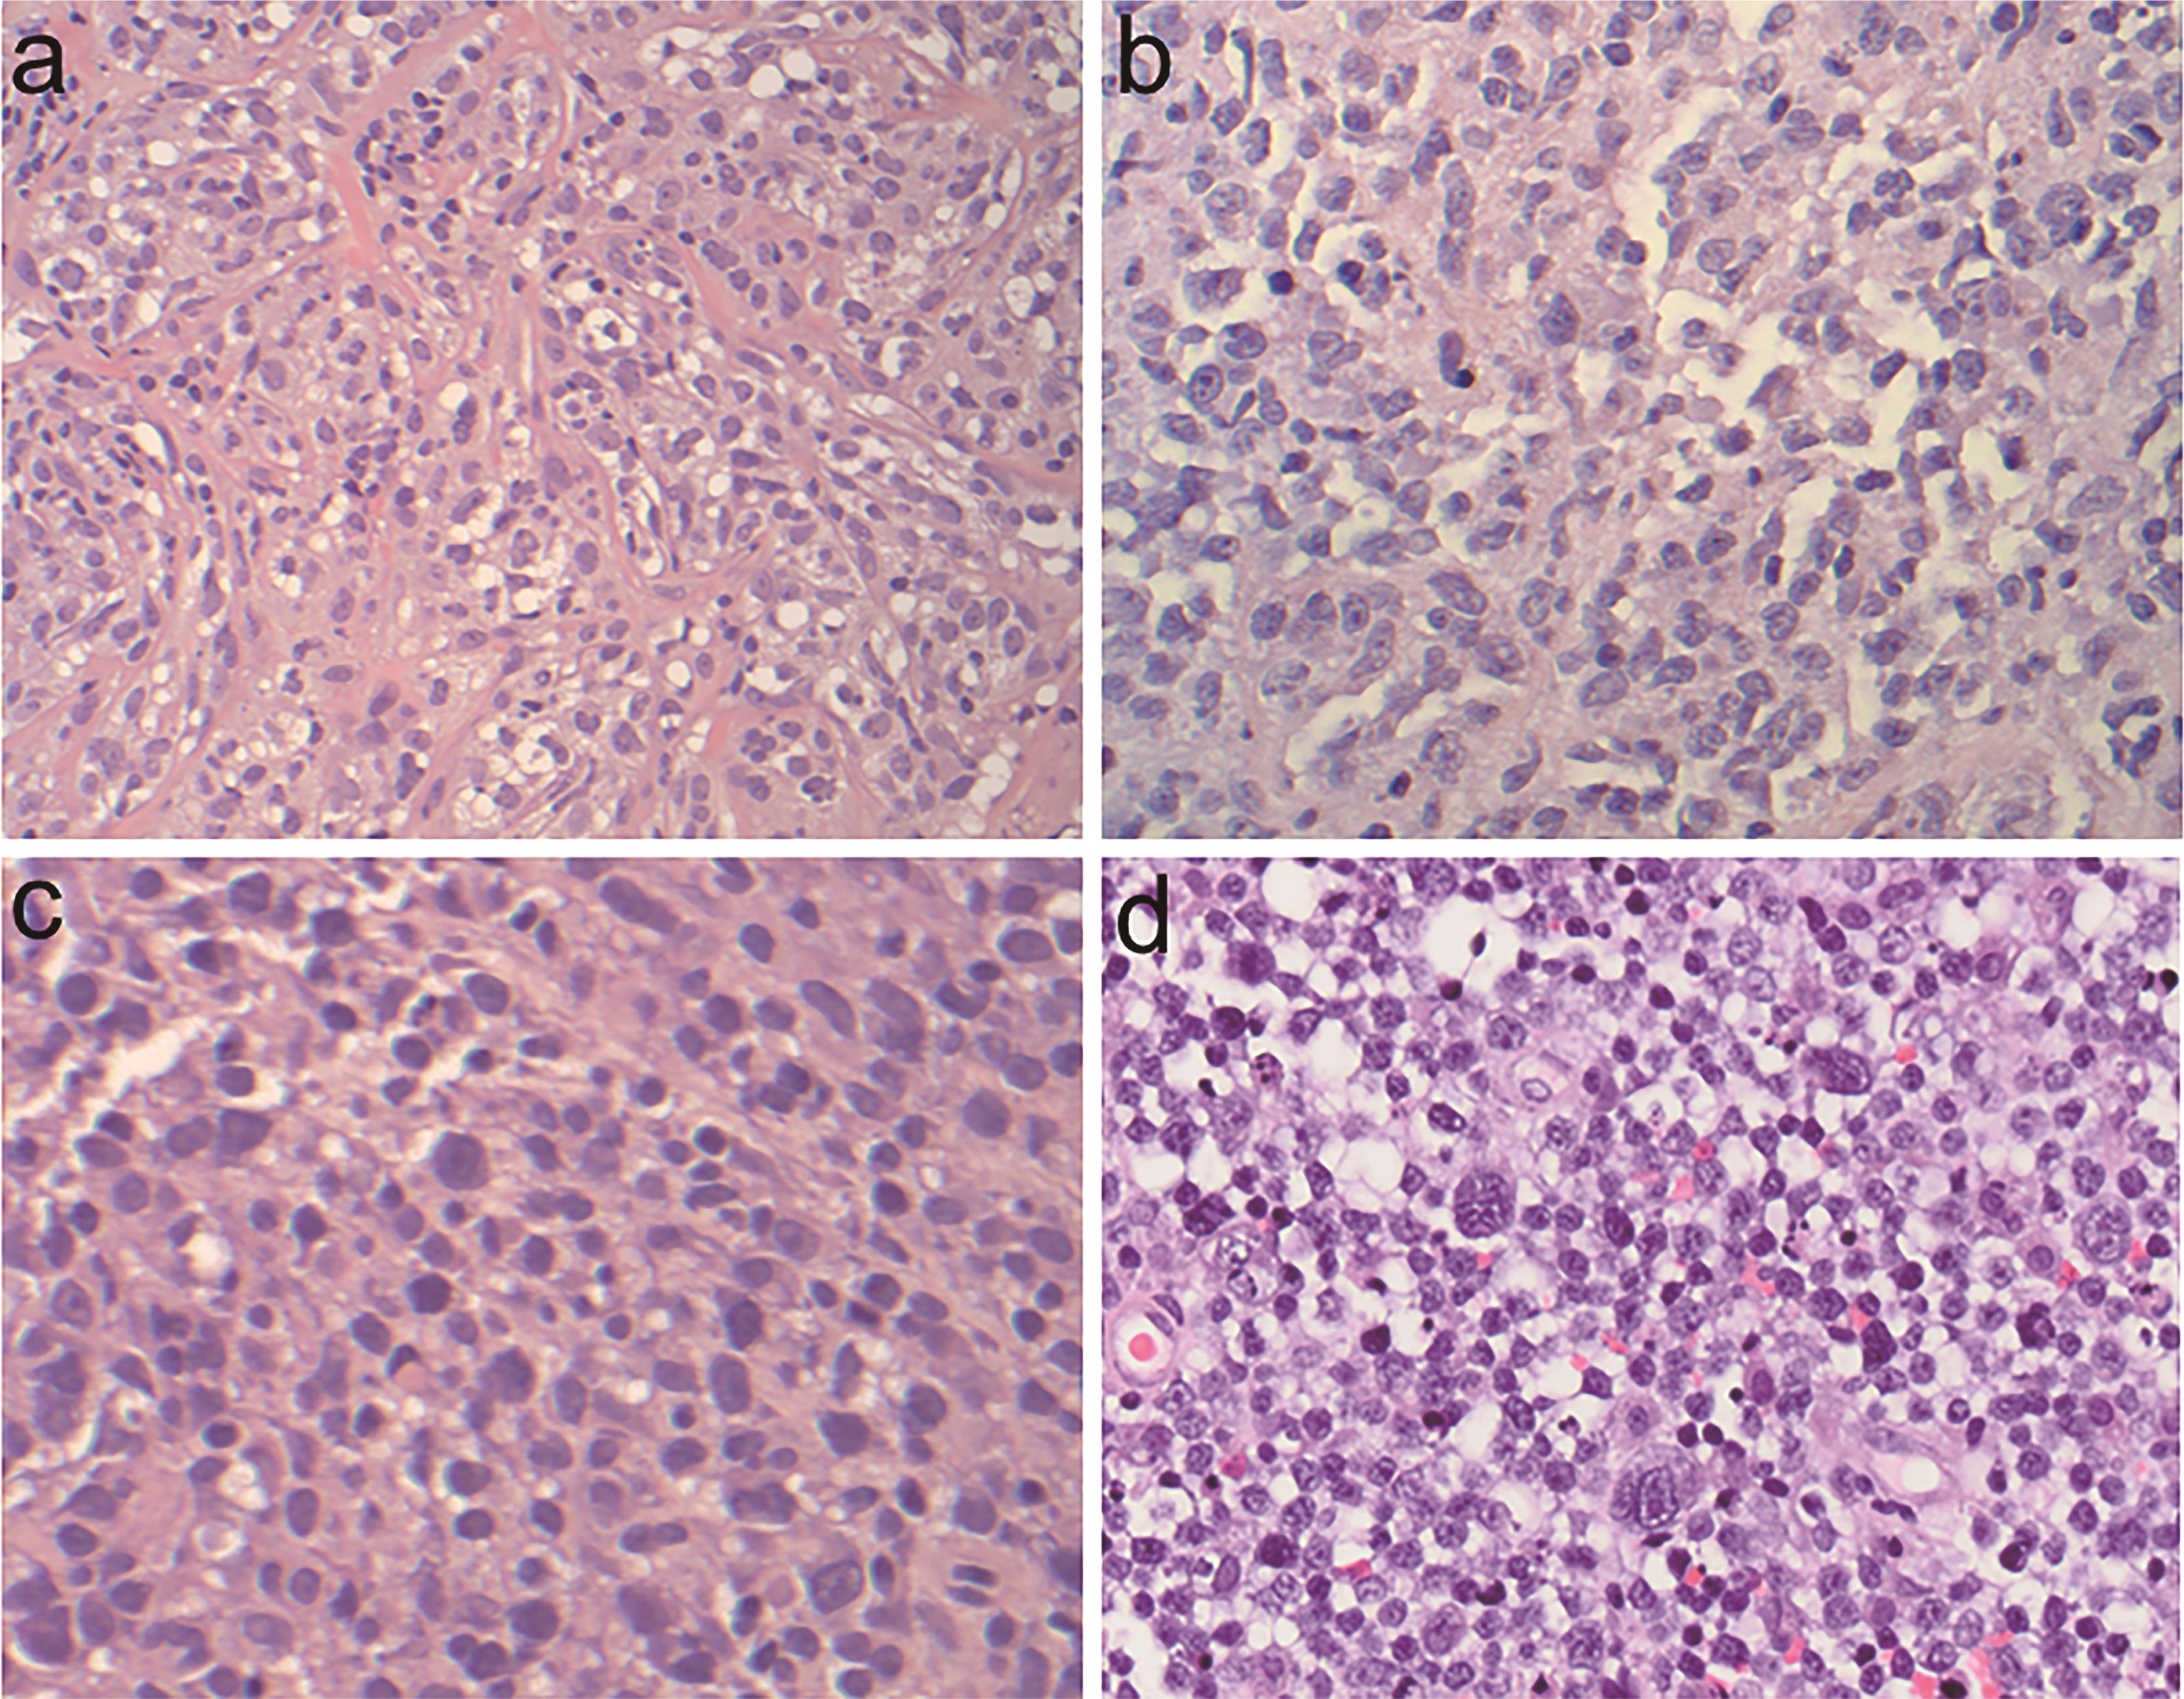 Representative cases of PMBL with variable morphologic features